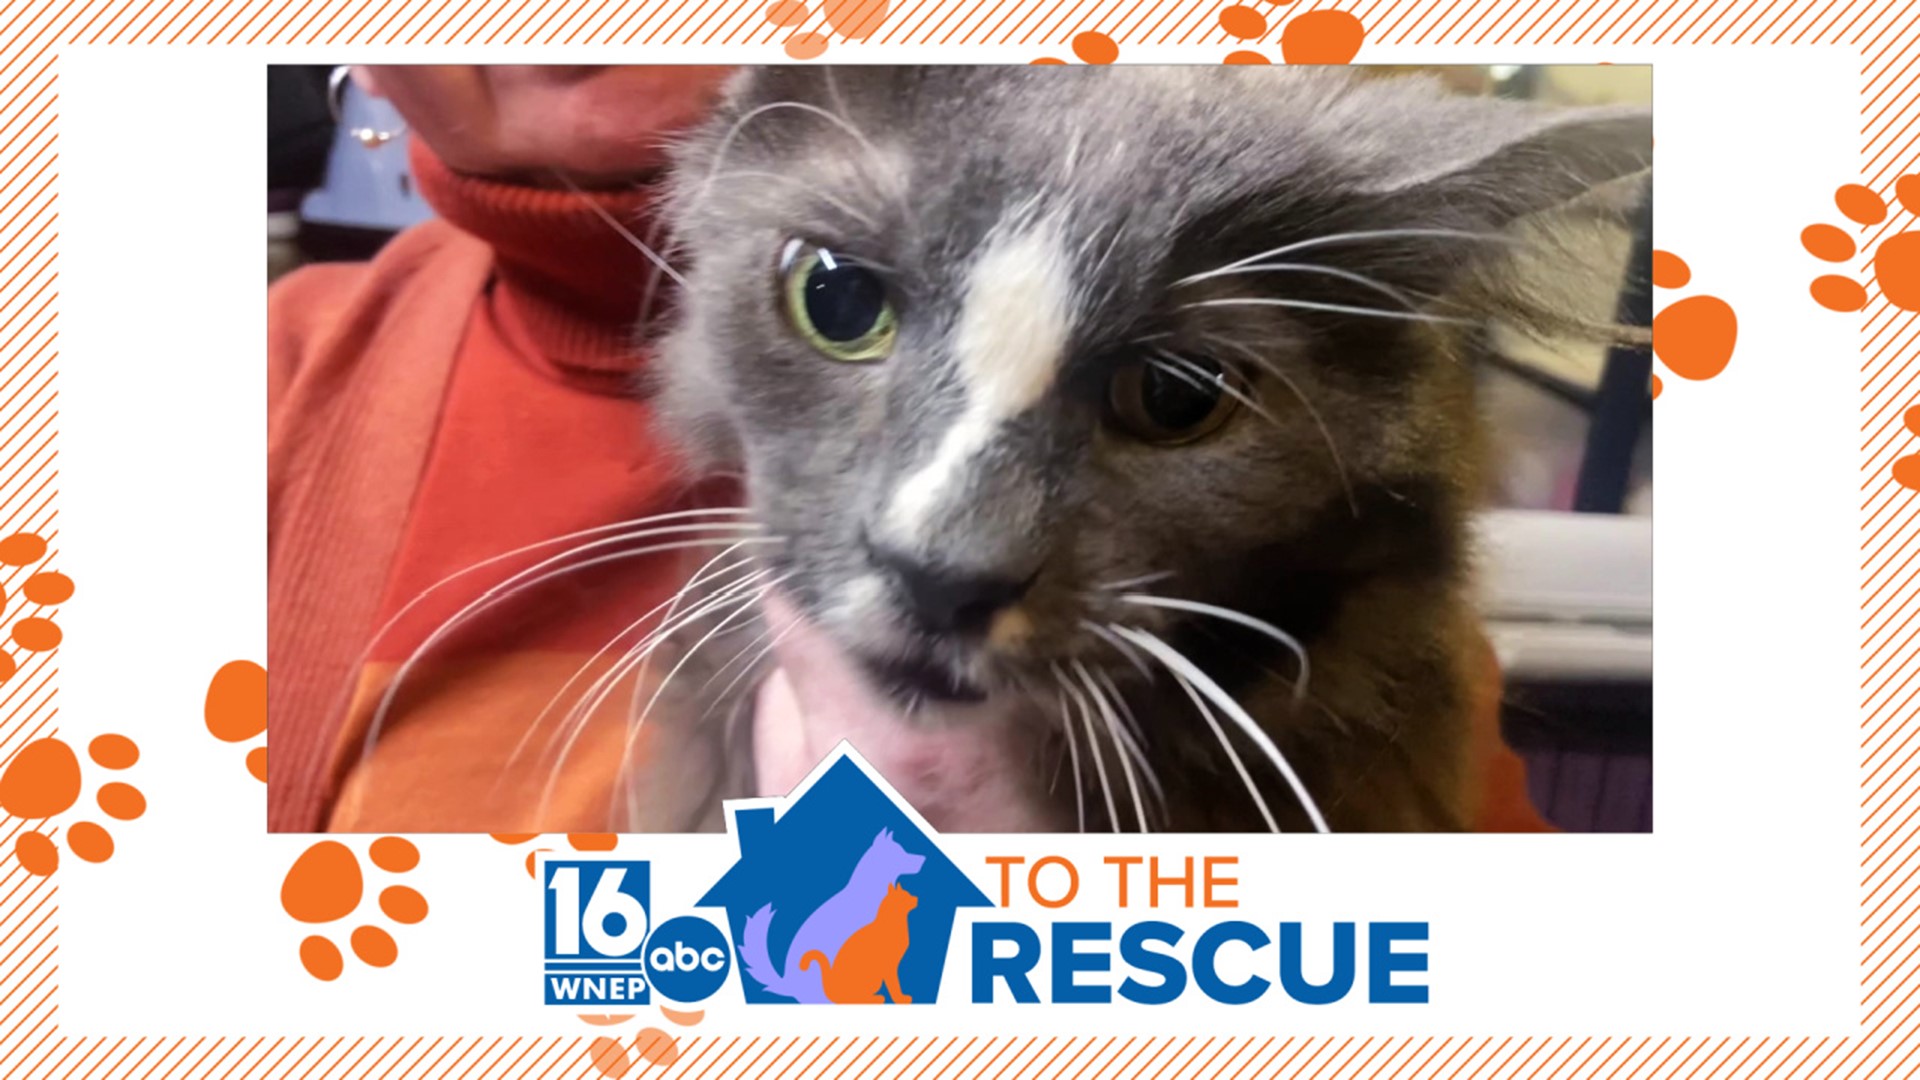 In this week's 16 To The Rescue, we meet an older cat who was found as a stray, but neighbors knew he was too friendly to be living outside.